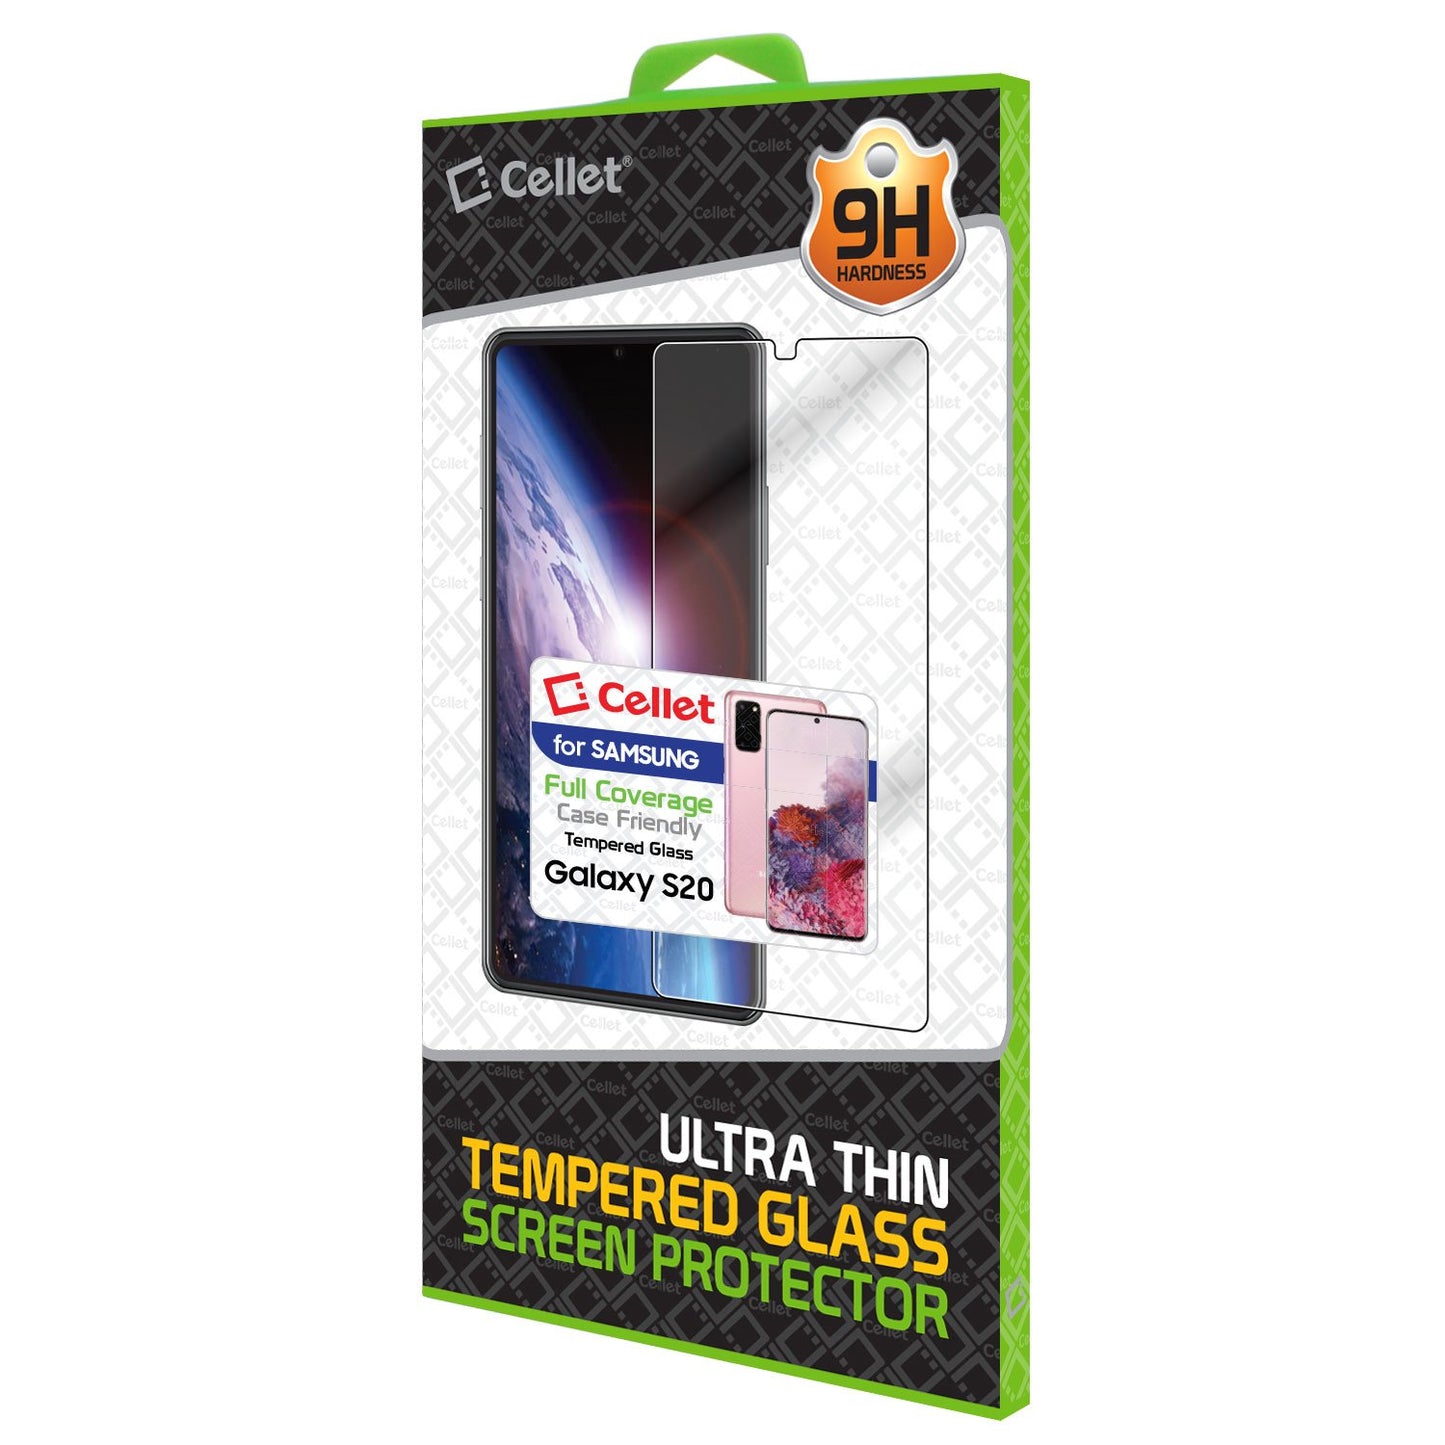 SGSAMS20F - Premium Ultra-Thin Tempered Glass Screen Protector for Samsung Galaxy S20 (0.3mm) by Cellet